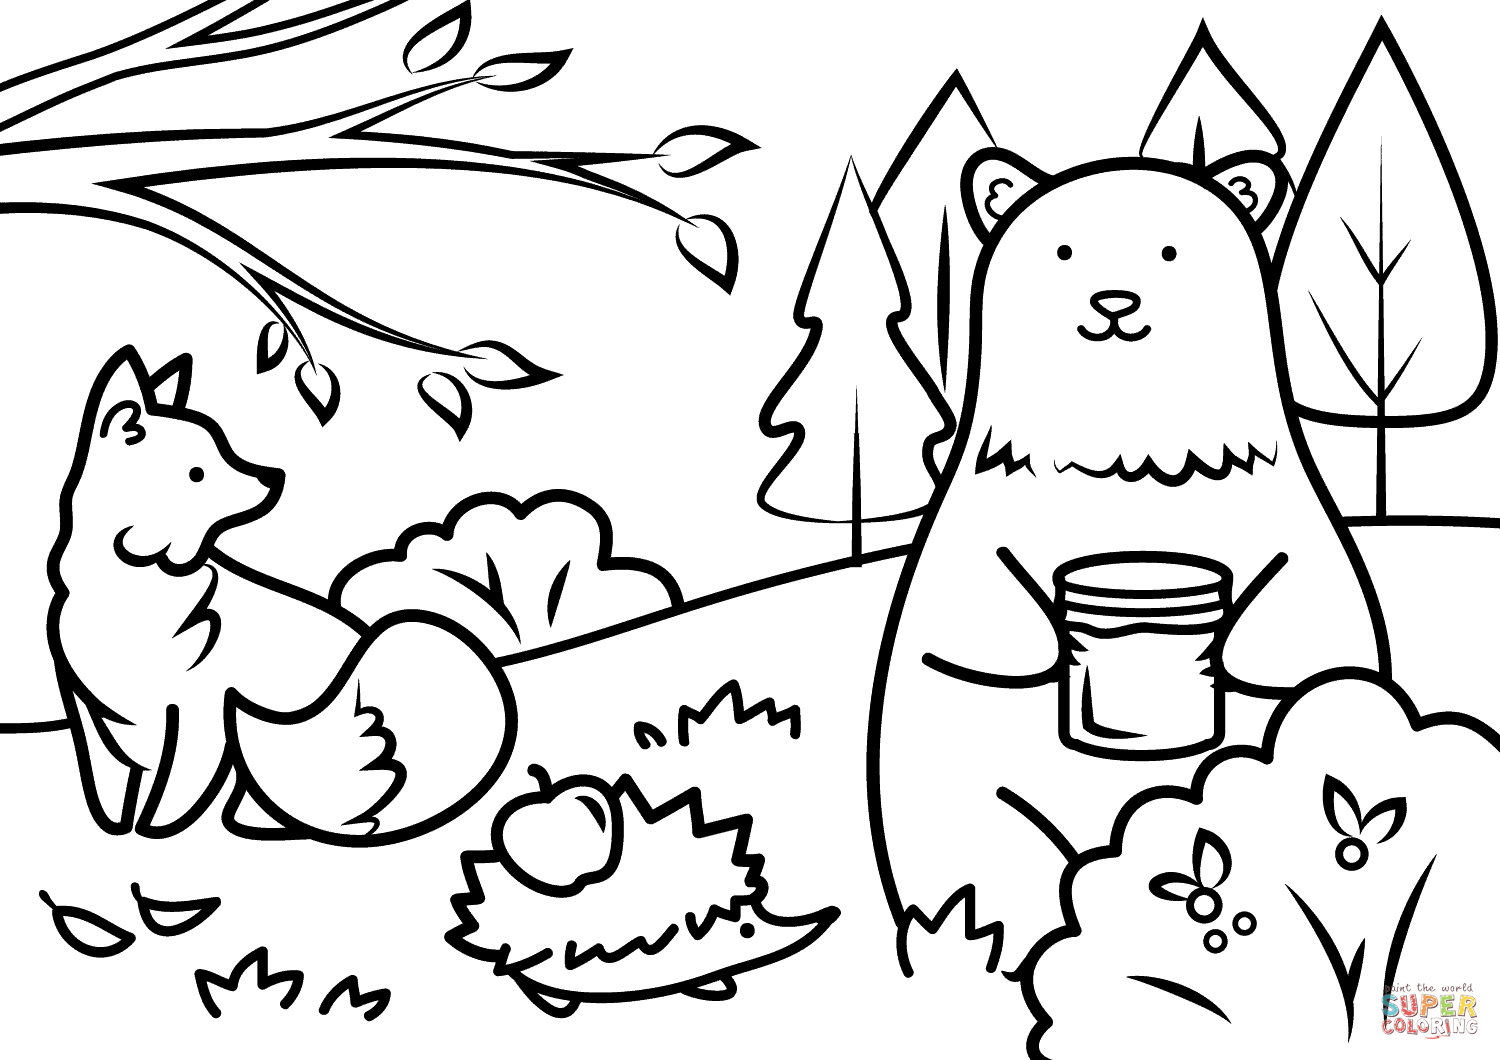 Autumn Animals Coloring Page | Free Printable Coloring Pages - Free Printable Fall Coloring Pages